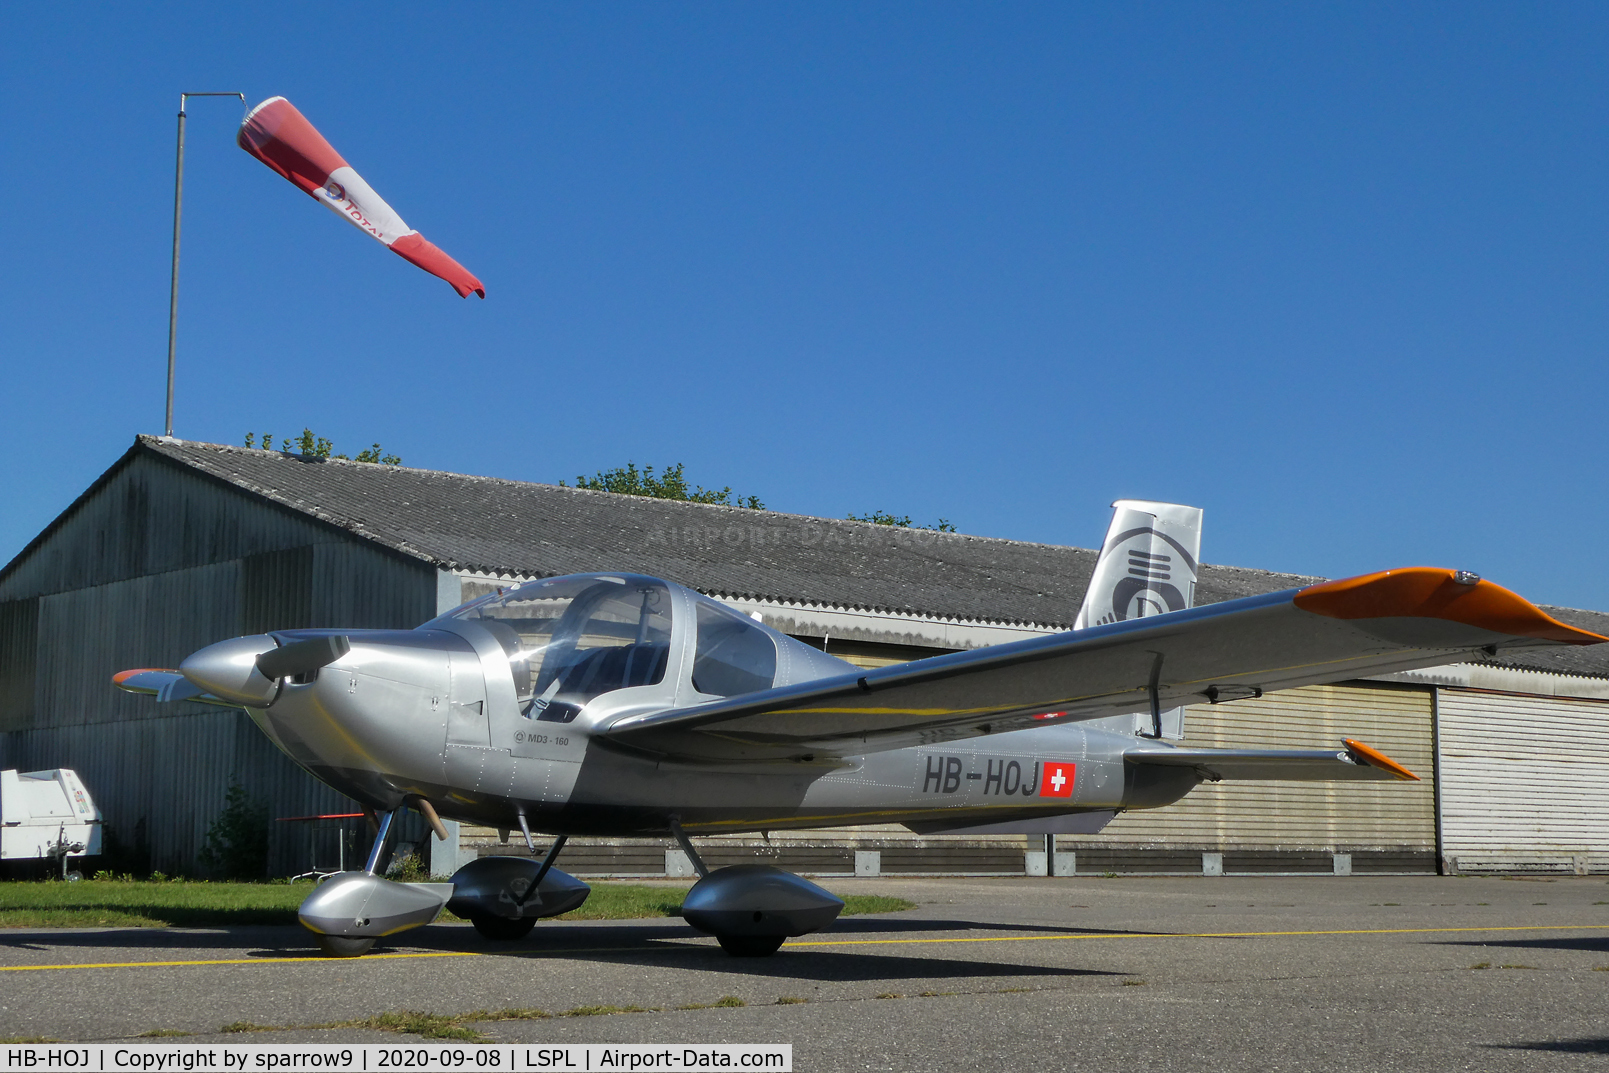 HB-HOJ, 1990 MDC Max Daetwyler MD3-160 Swiss Trainer C/N 002, At its birthplace: Langenthal-Bleienbach.